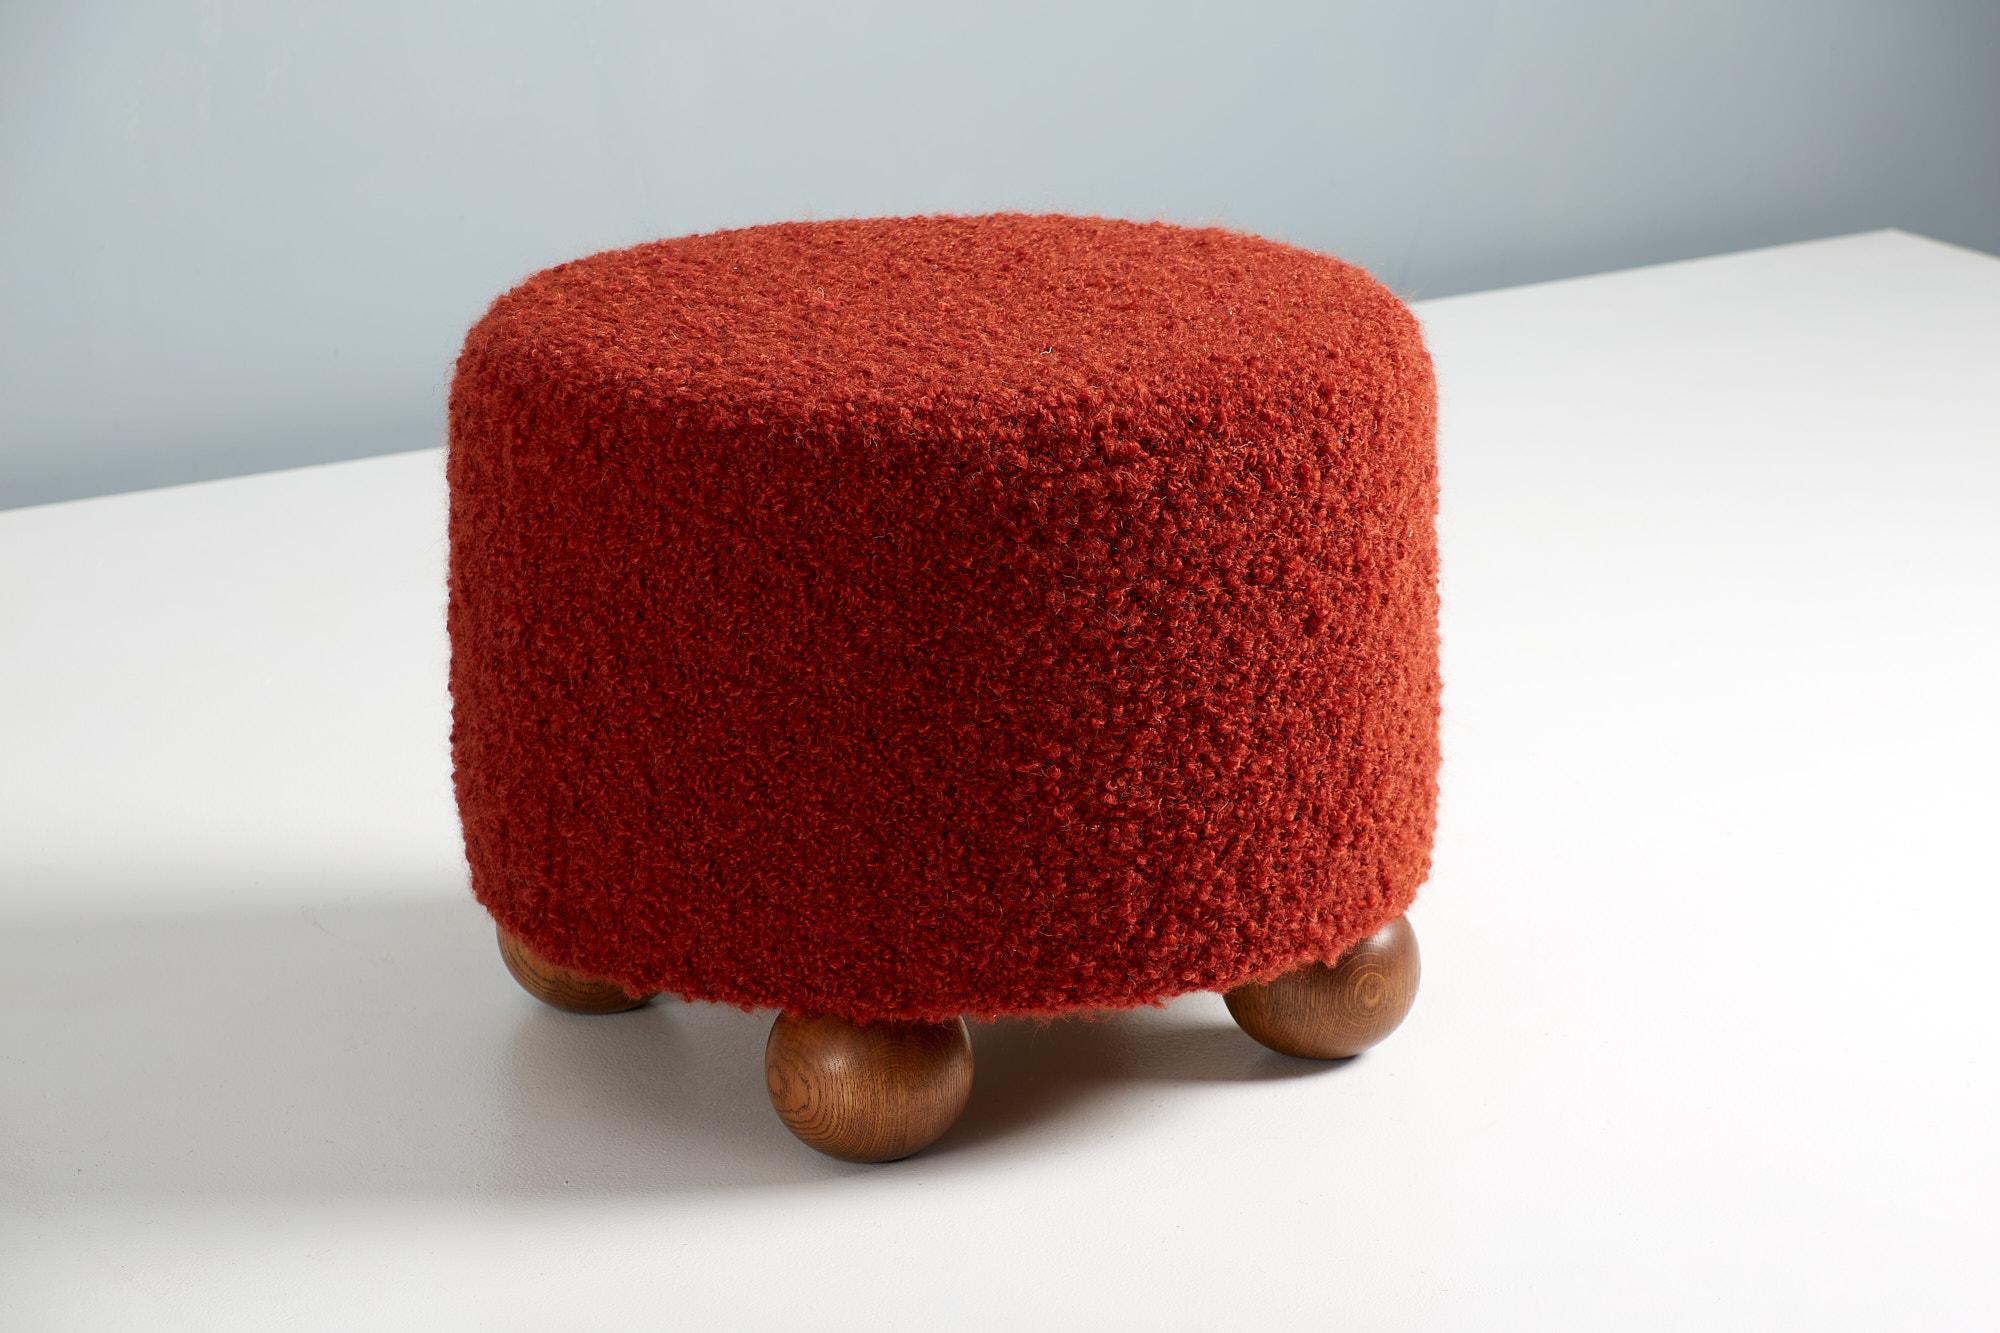 Dagmar Design - Round Ottoman.

Custom-made ottomans developed & produced at our workshops in London using the highest quality materials. These examples are upholstered in Pierre Frey OPIO boucle fabric in a vivid, deep red. The distinctive ball